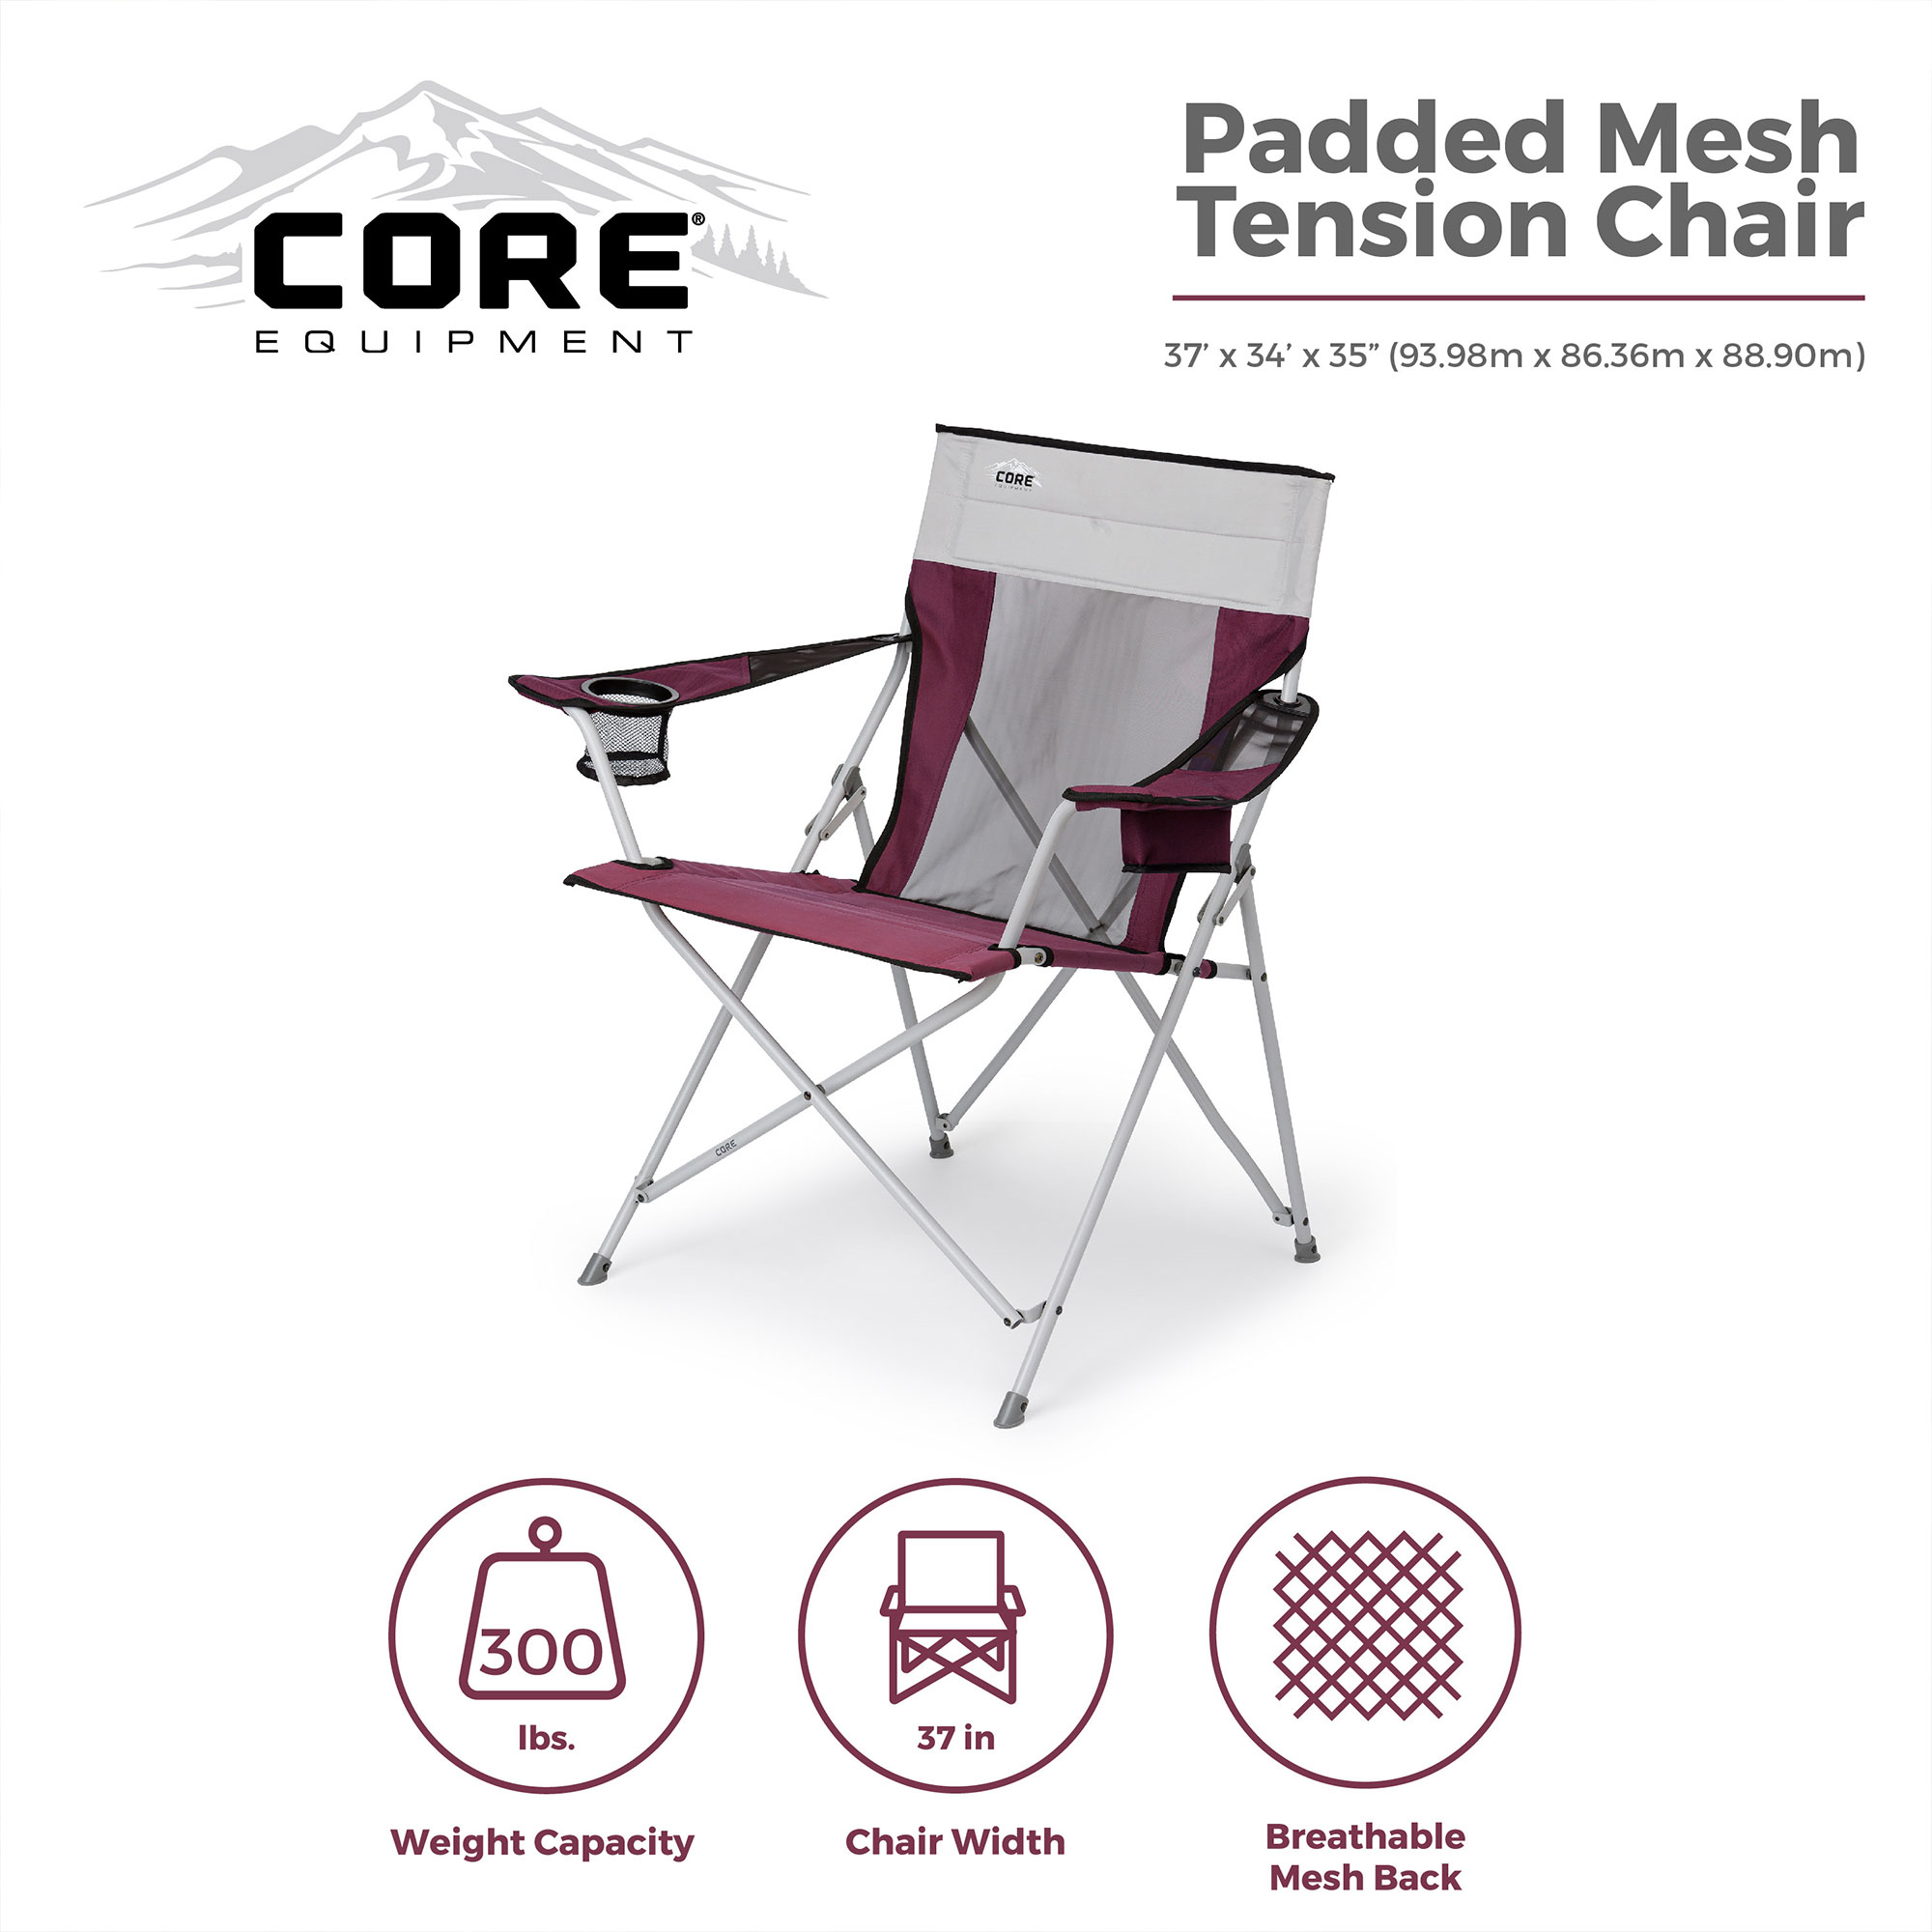 Core Portable Outdoor Camping Folding Chair with Carrying Storage Bag, Wine - image 5 of 6